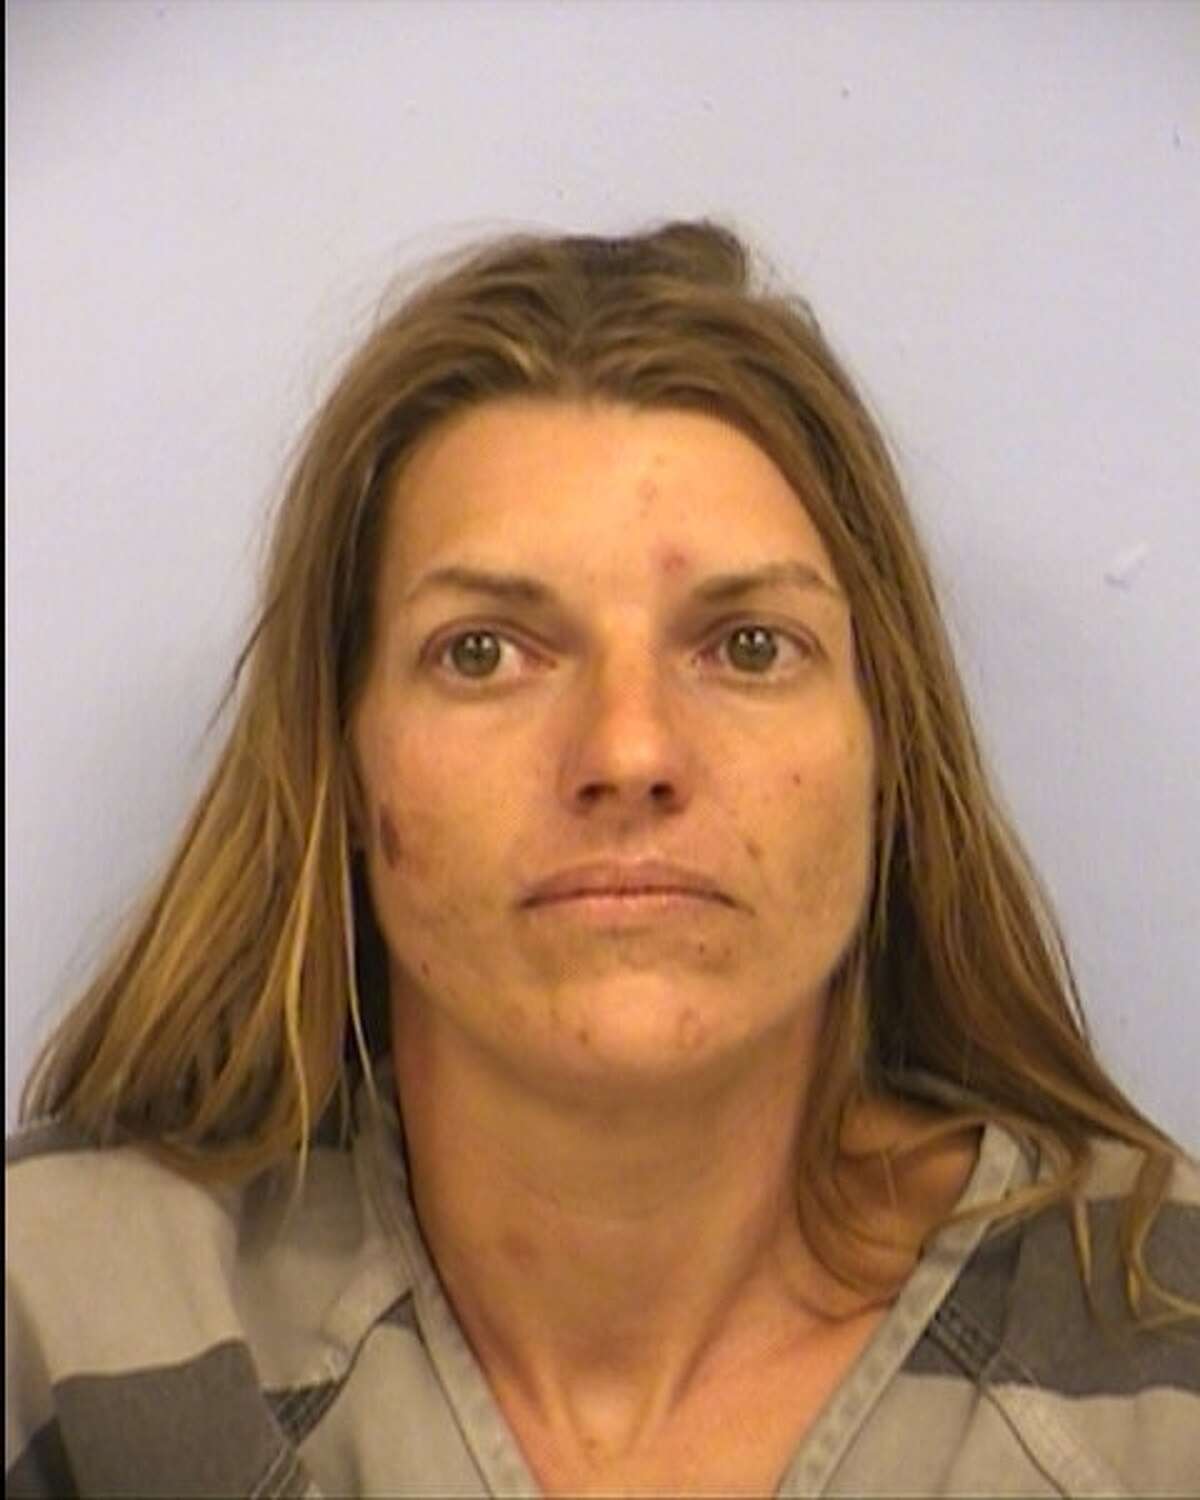 Carissa Chancey, 36, was arrested Aug. 11 and charged with abandoning and endangering a child, and possession of a controlled substance. She is being held on a $40,000 bond in the Travis County Correctional Complex, according to county records.